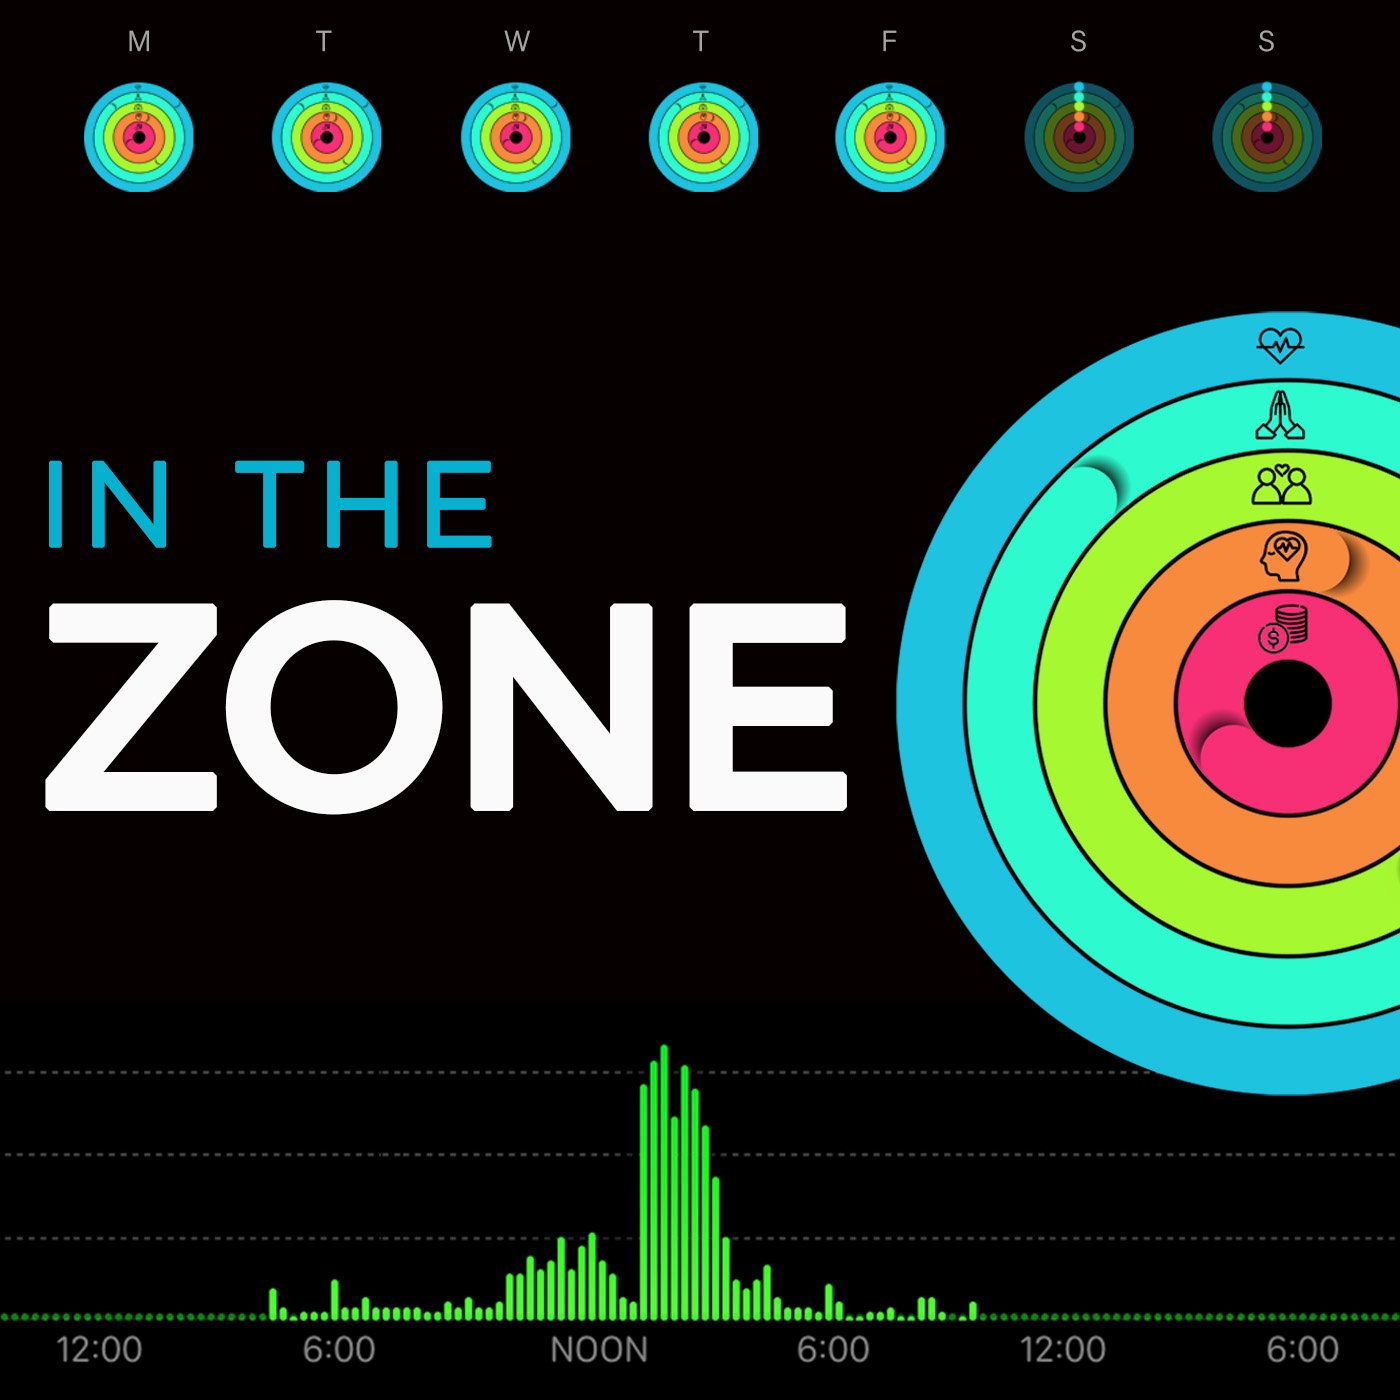 IN THE ZONE: In the Physical Health Zone